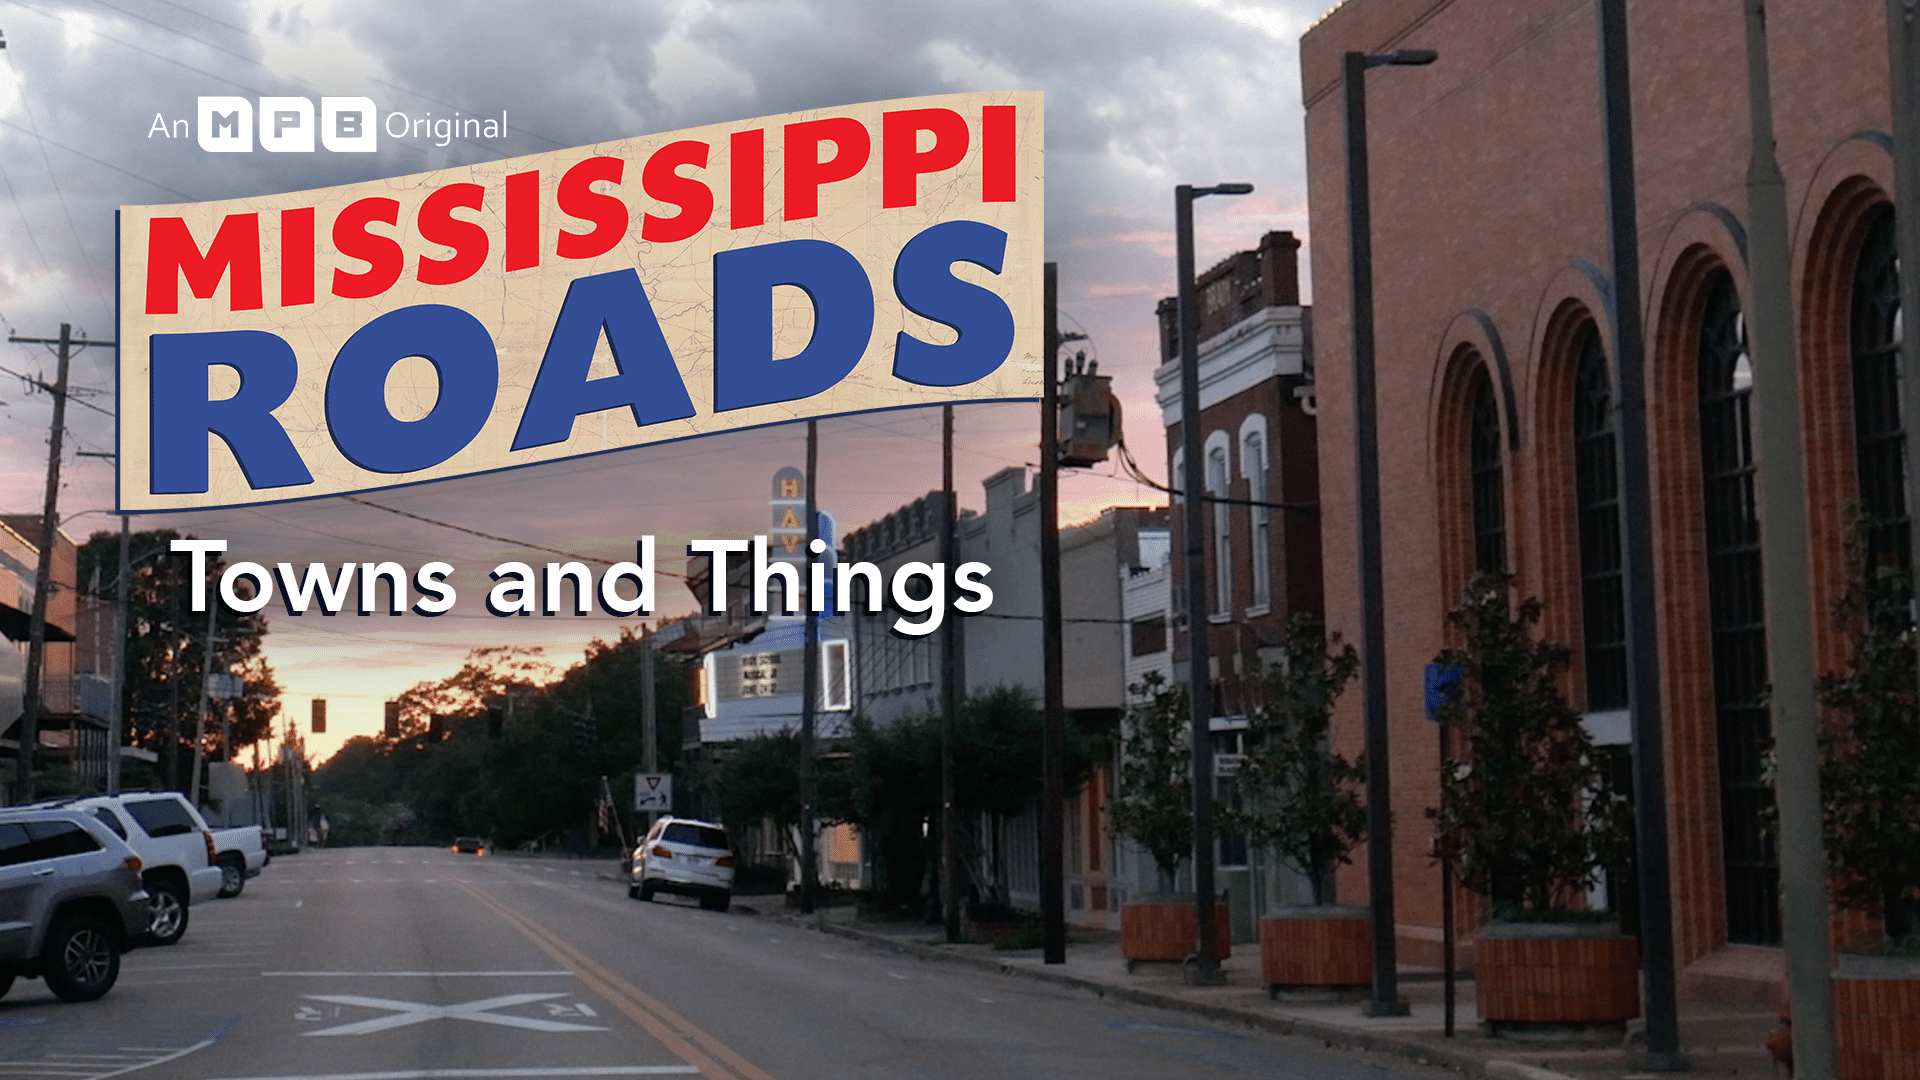 Travel Guide to Brookhaven, Mississippi - Country Roads Magazine